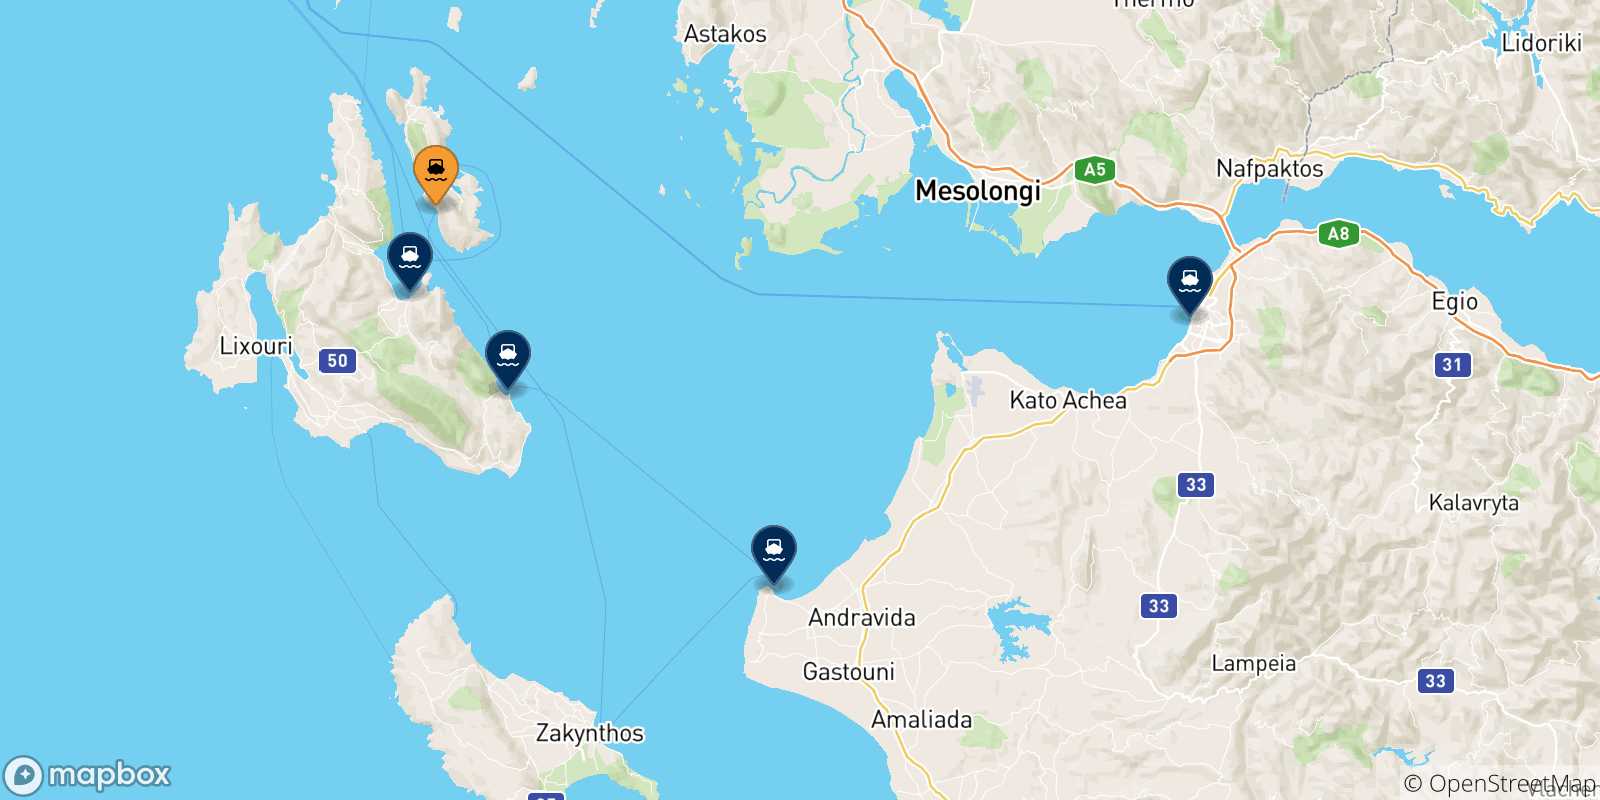 Map of the possible routes between Pisaetos (Ithaka) and Greece